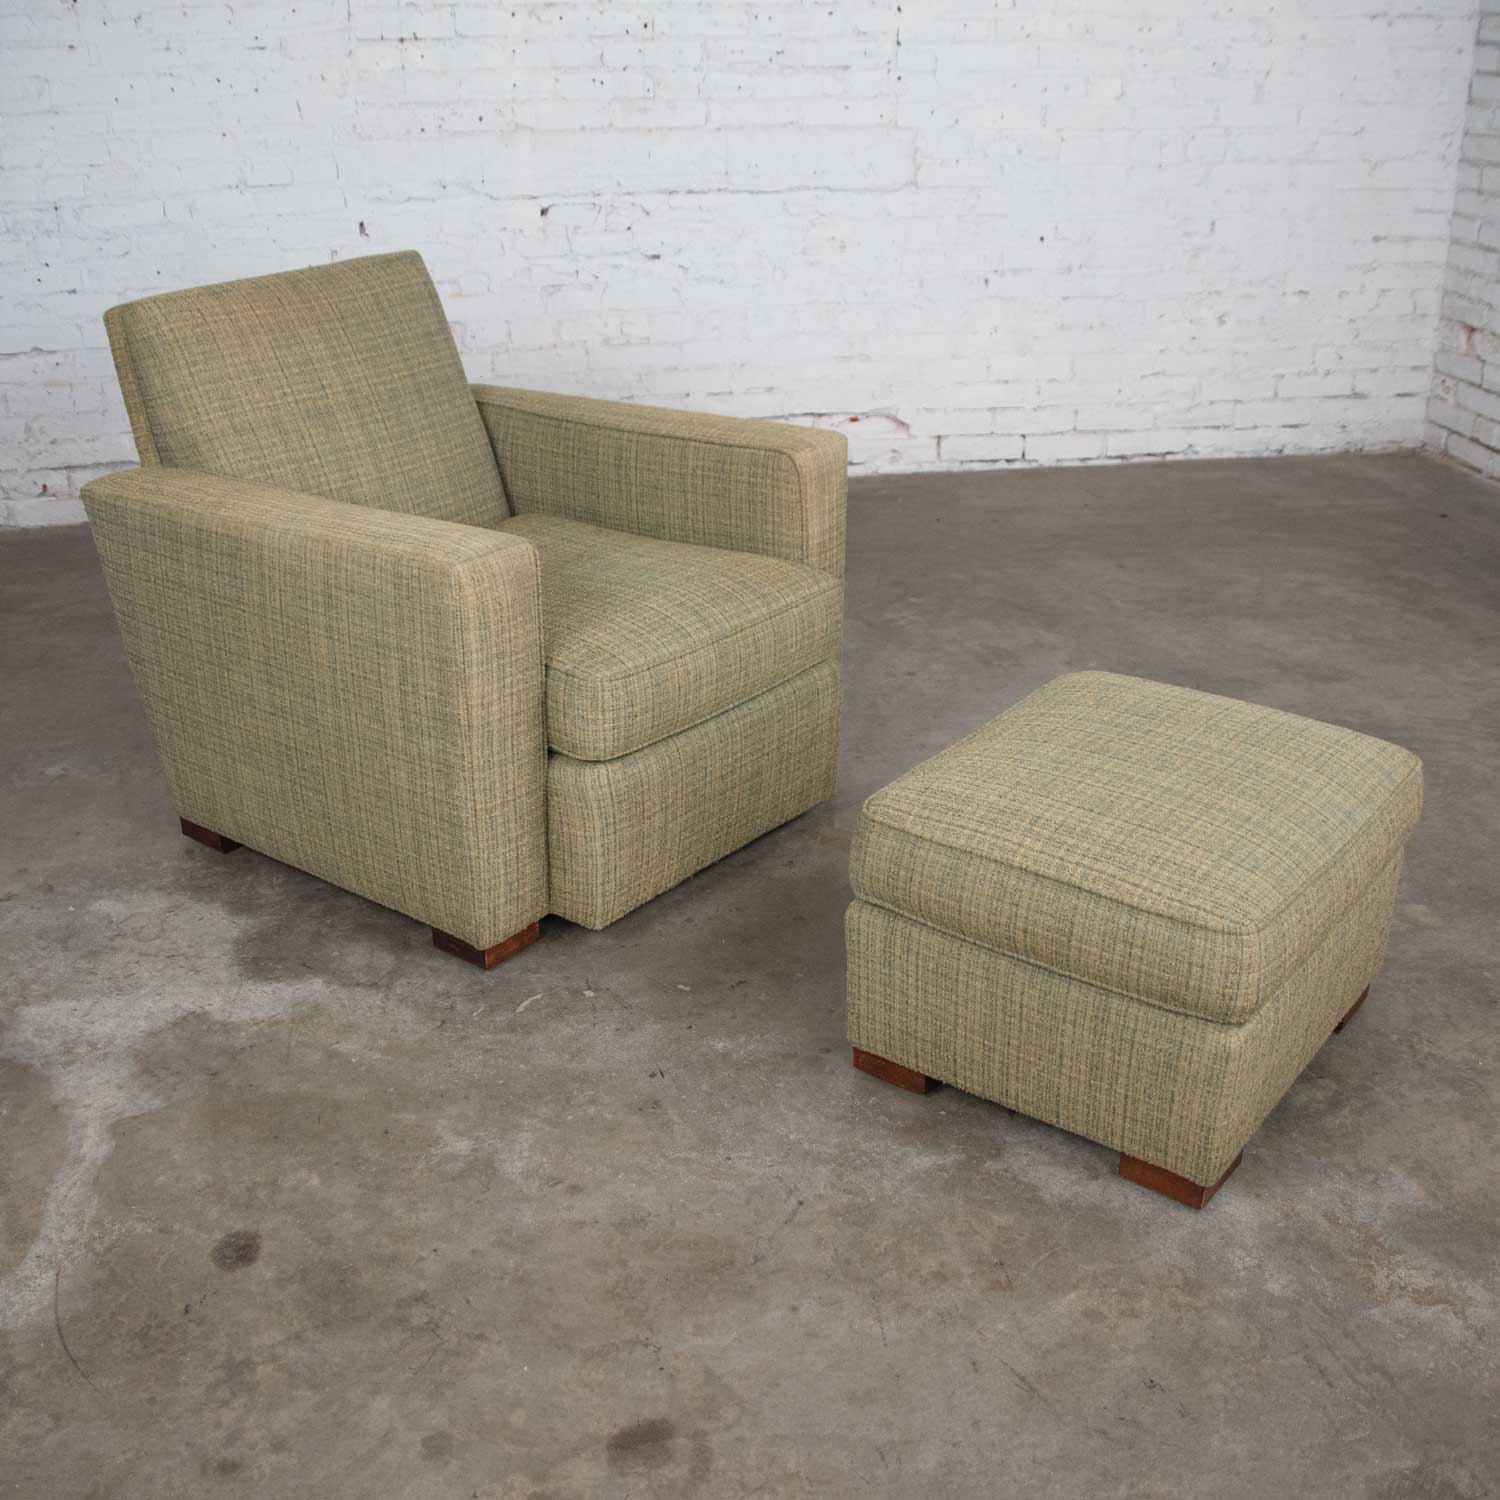 Vintage Art Deco Style Club Chair and Ottoman in Green Tweed by Hickory Chair